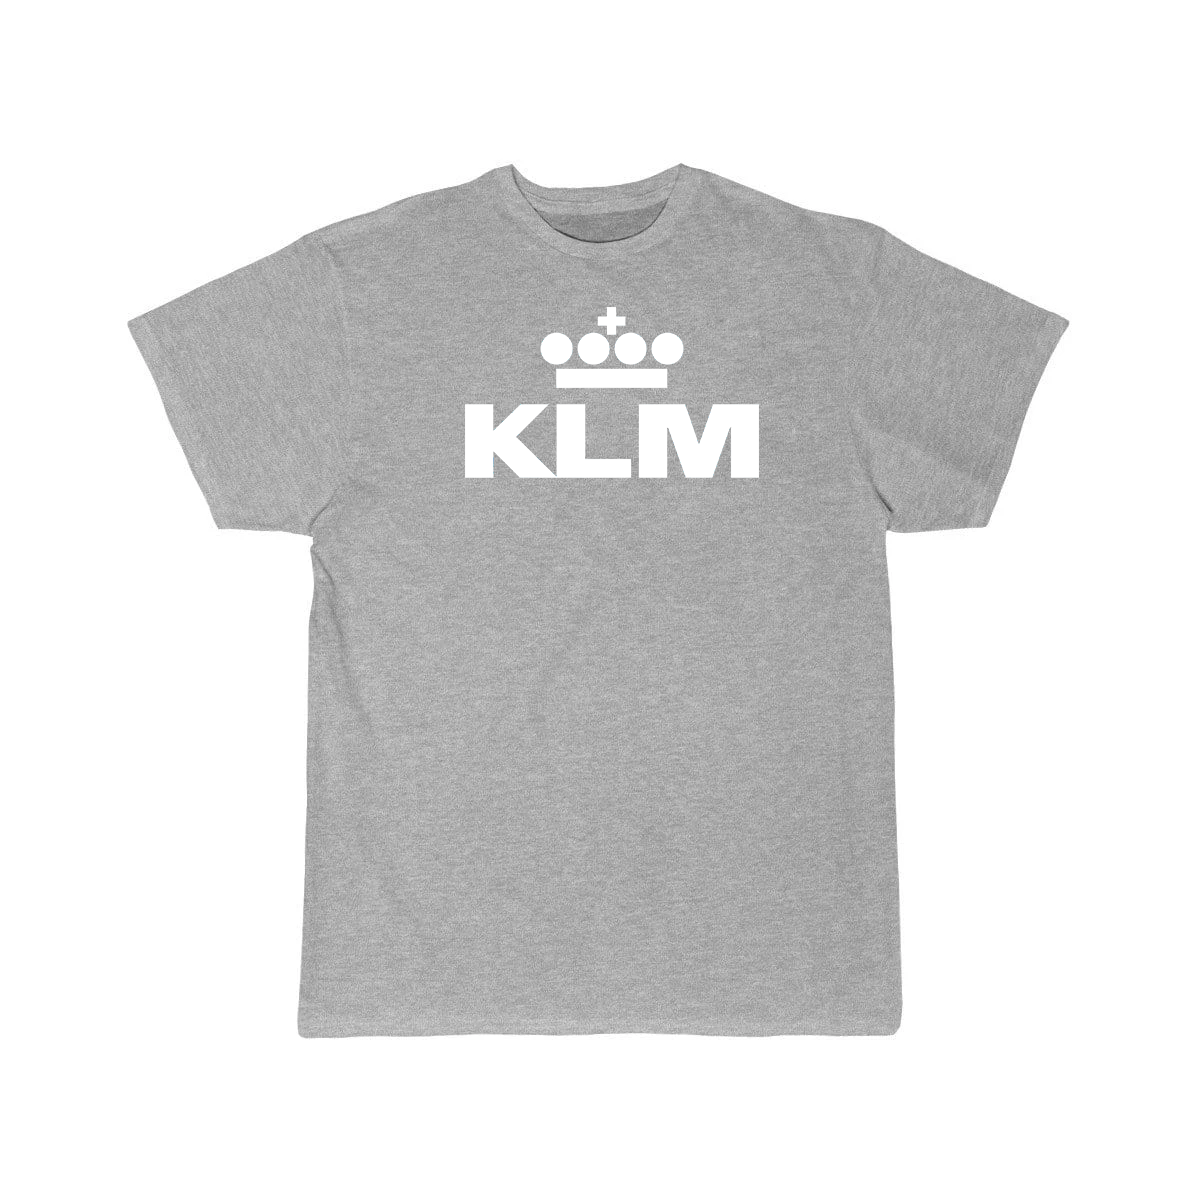 KLM AIRLINE T-SHIRT